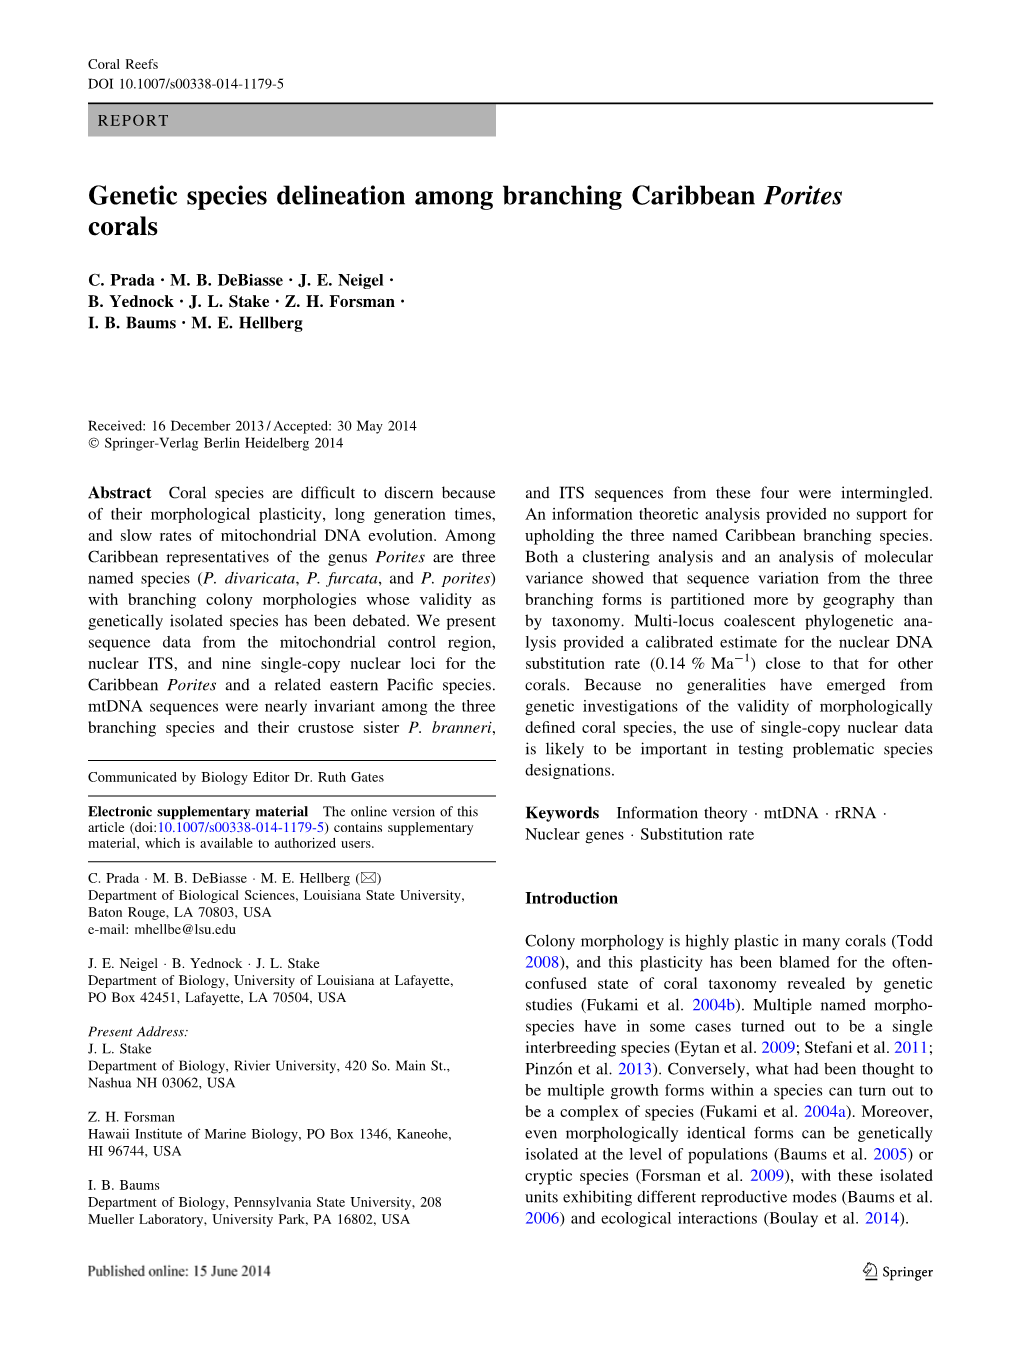 Genetic Species Delineation Among Branching Caribbean Porites Corals